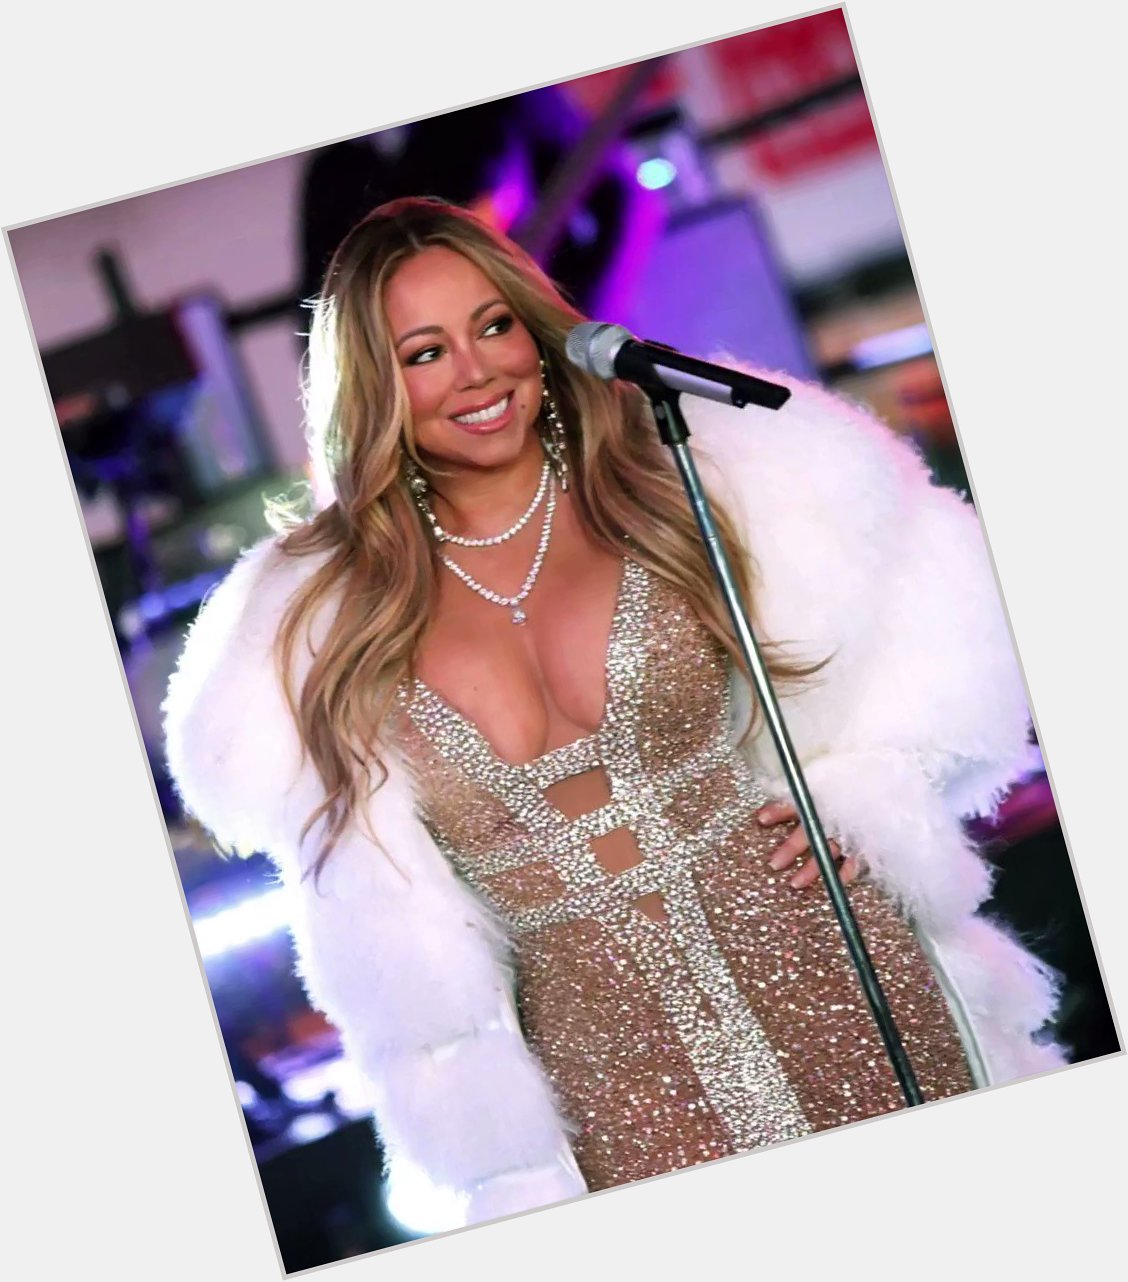 Happy birthday, Mariah Carey.

Most solo number ones, longest run at number one, and an icon through every era. 